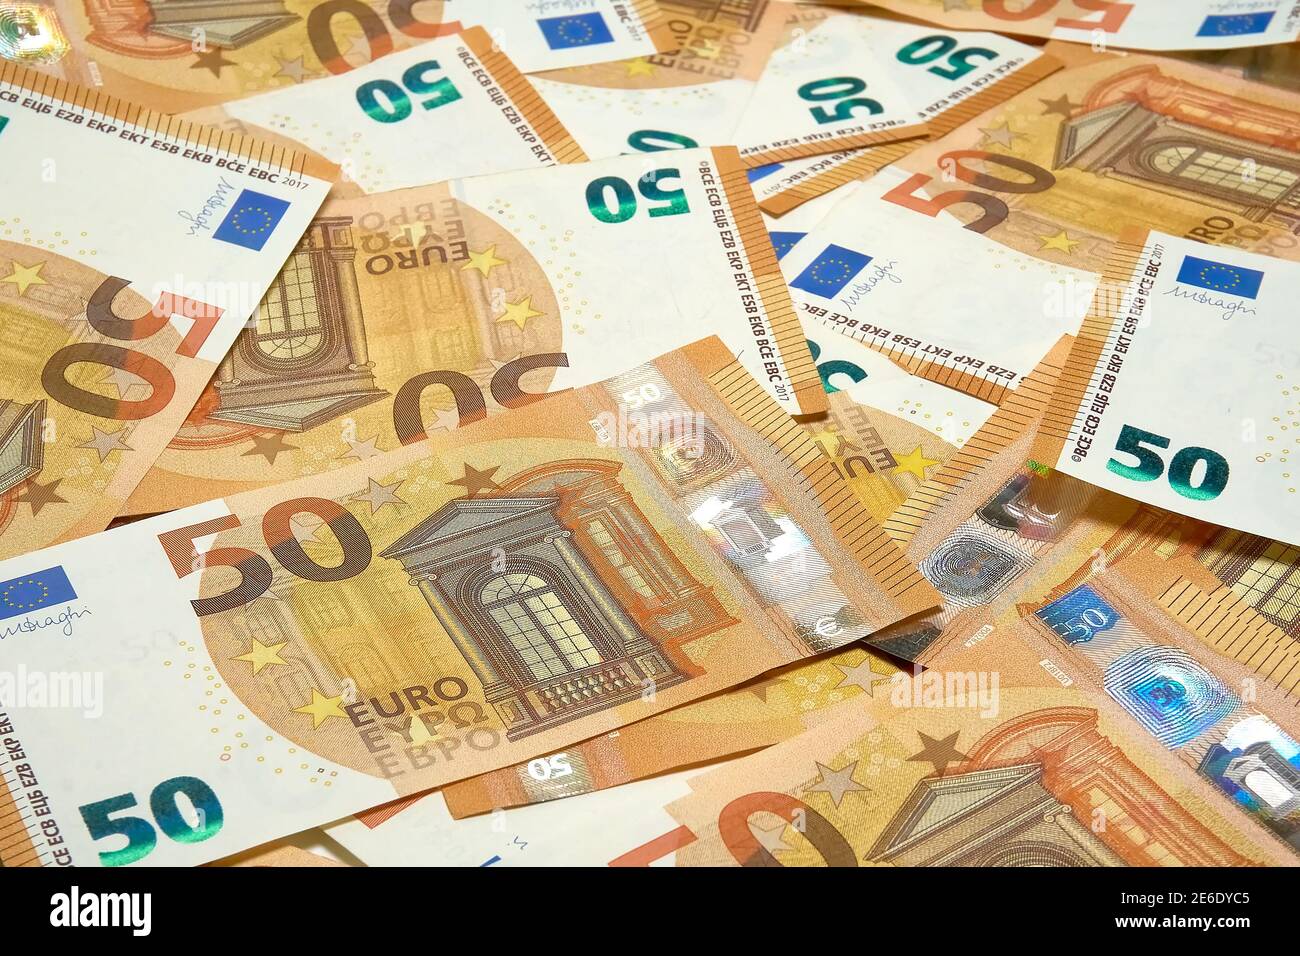 Euro deposits, banknotes currency finances Stock Photo